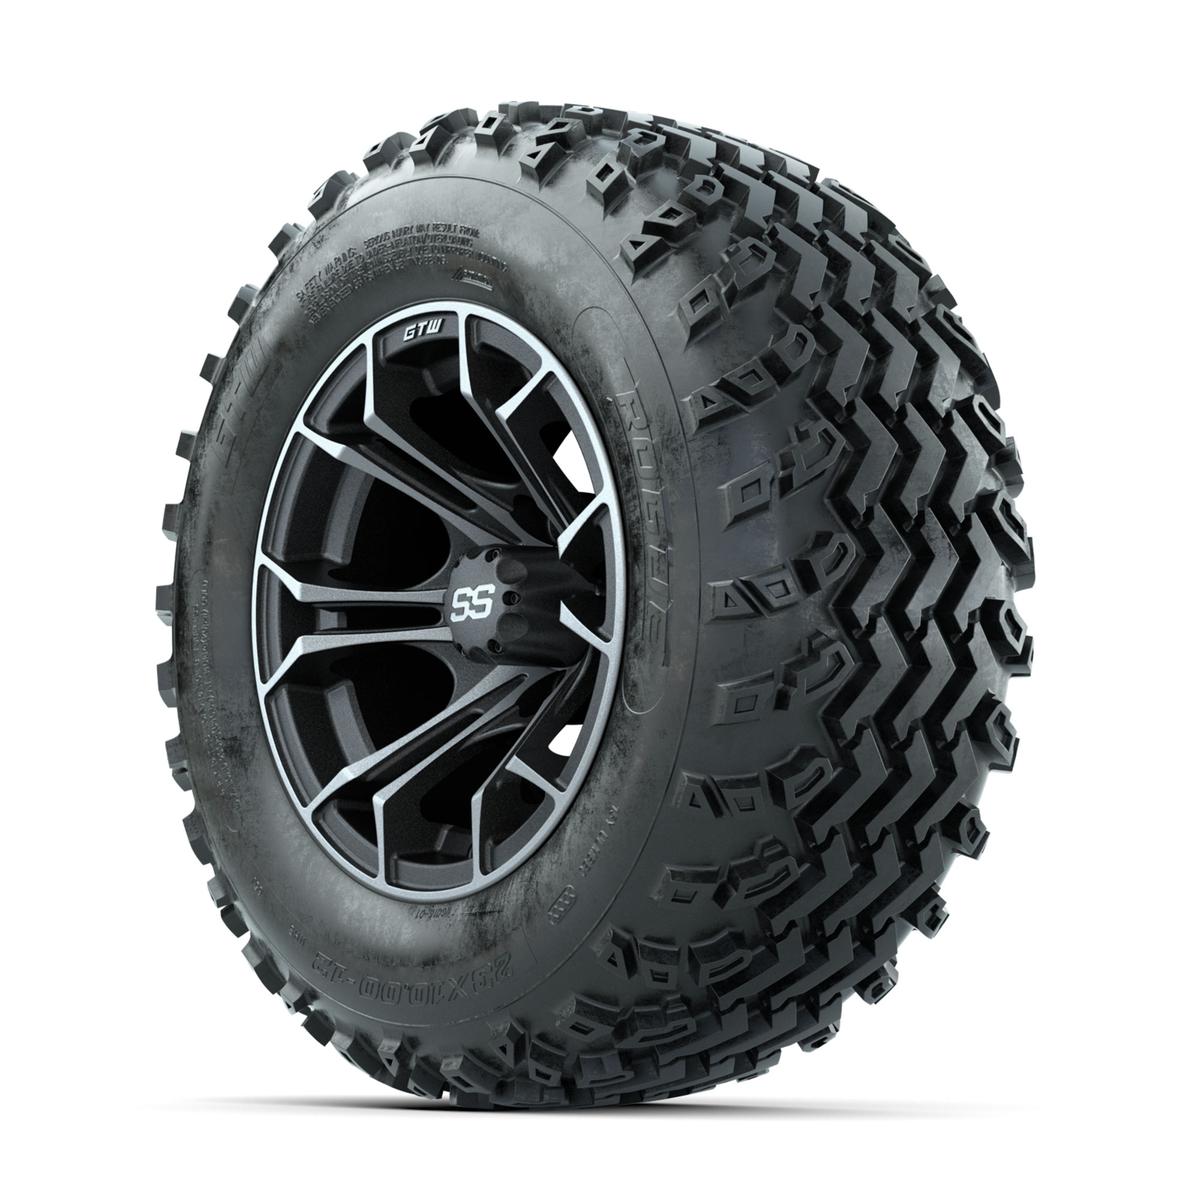 GTW Spyder Machined/Grey 12 in Wheels with 23x10.00-12 Rogue All Terrain Tires – Full Set